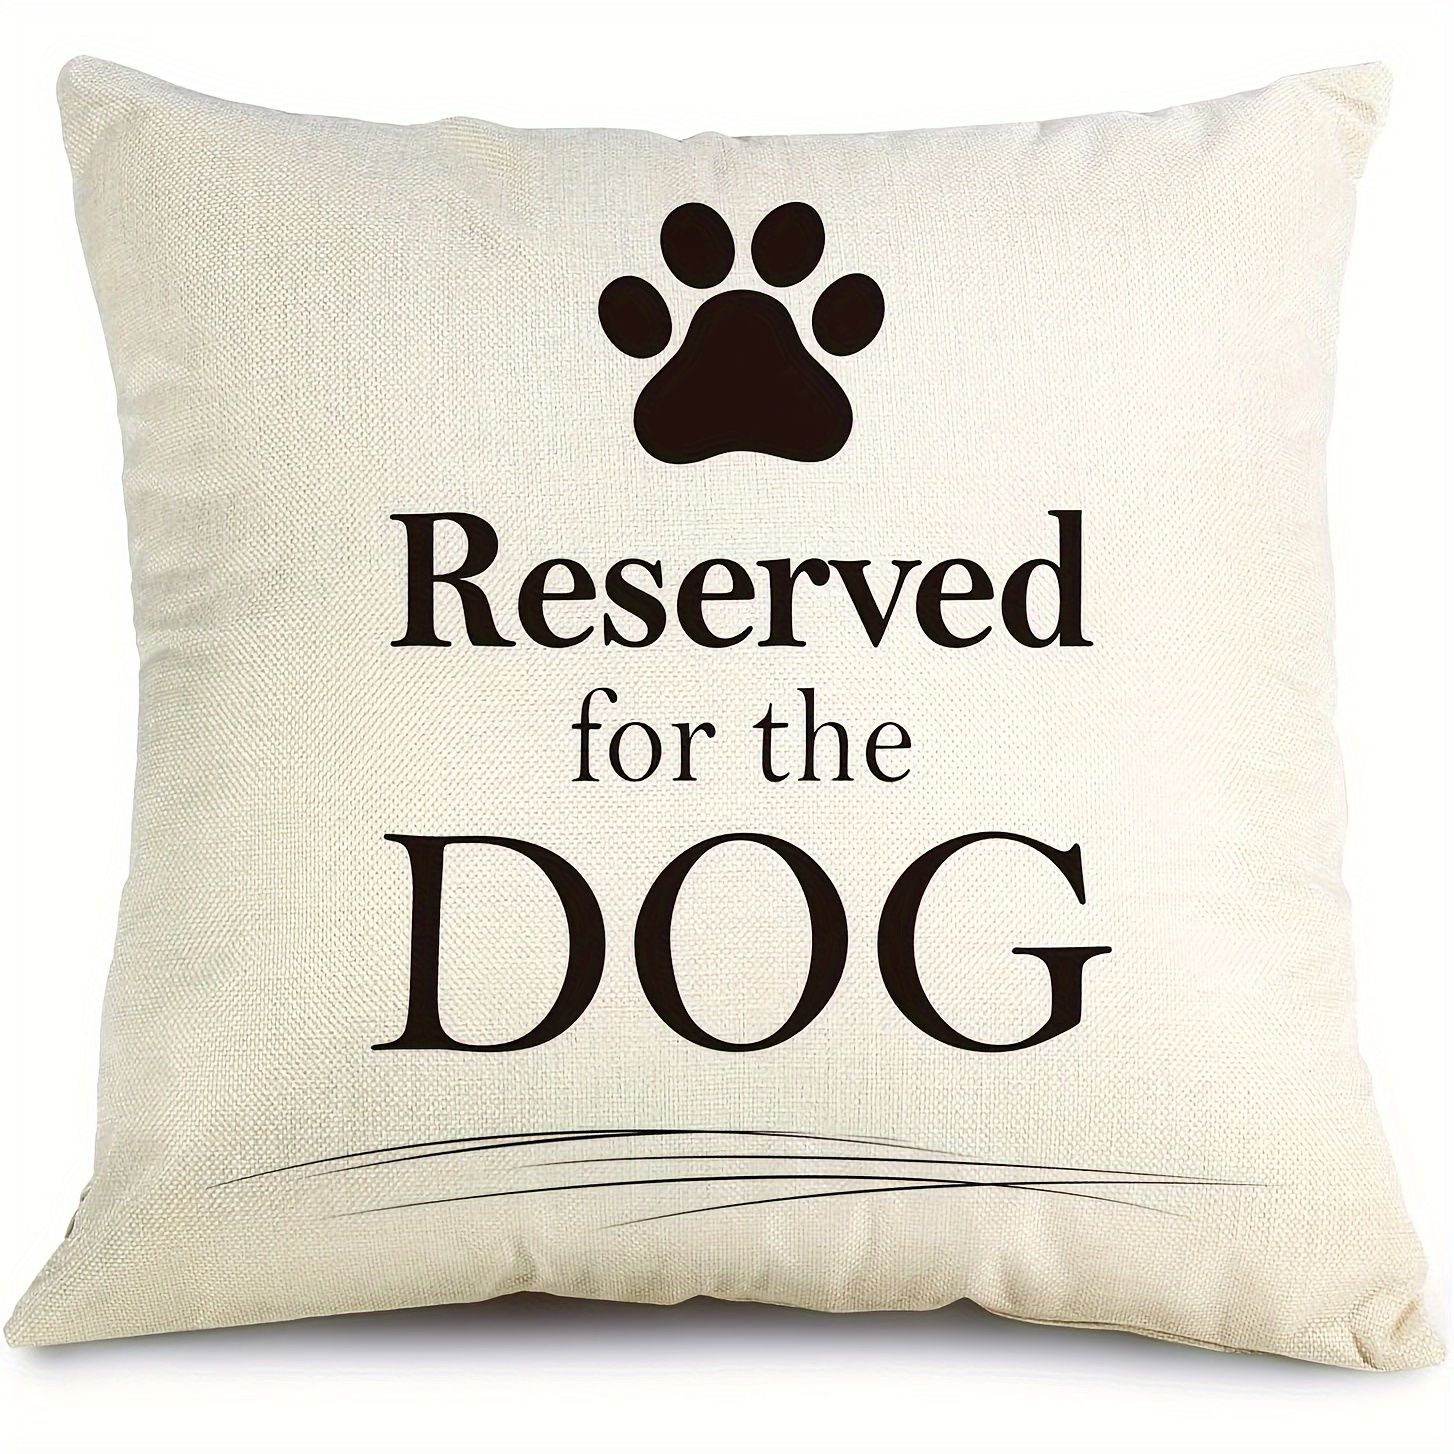 

1pc, Linen Cushion Set Reserved For Dog Pillowcase, Fun Dog Pillow Cover, Dog Decoration Gift, Dog Mother Gift, Dog Owner, Sofa, Bedroom, Living Room, Bed Pillowcase (excluding Pillow Core)